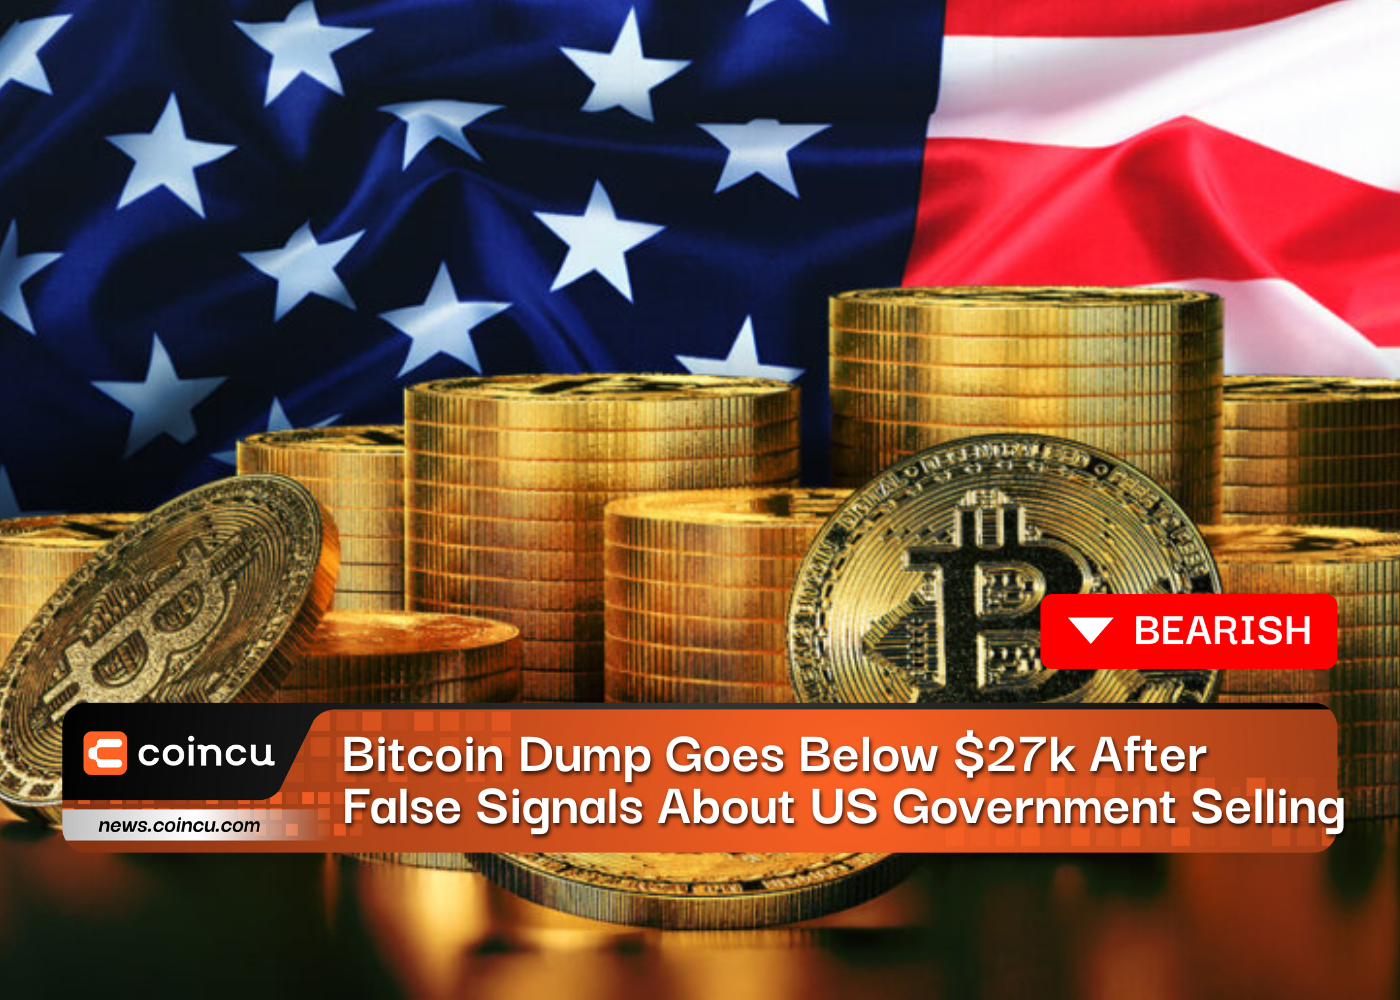 Bitcoin Dump Goes Below $27k After False Signals About US Government Selling